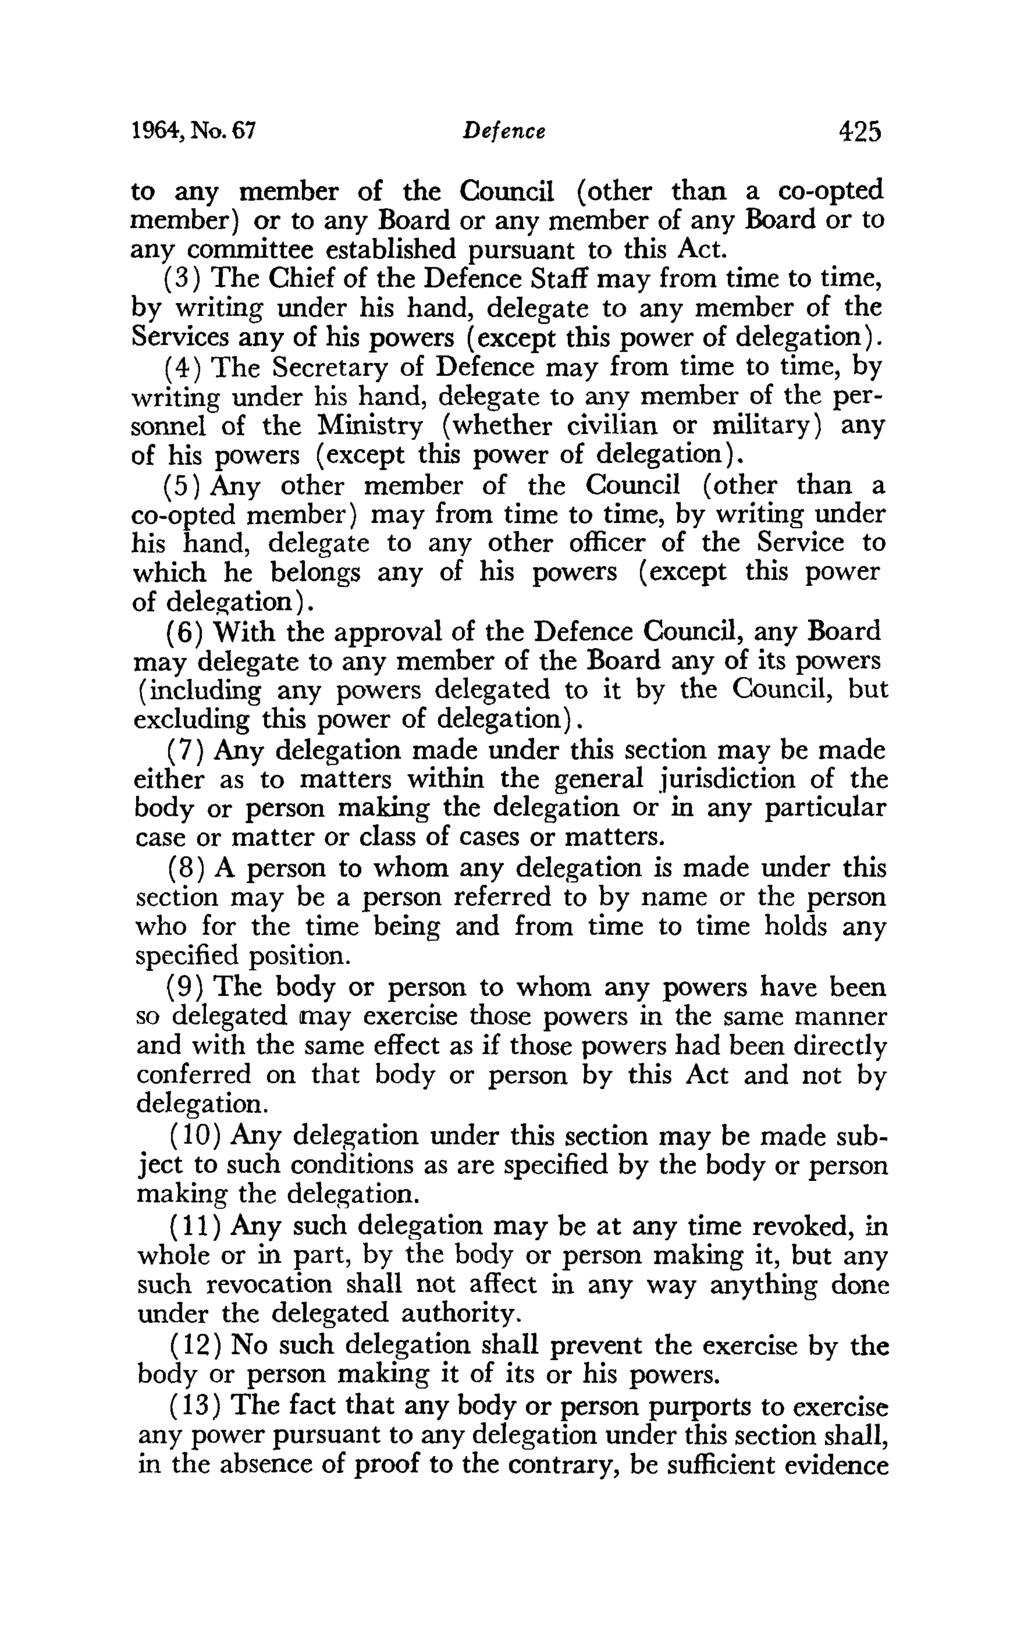 1964, No. 67 Defence 425 to any member of the Council (other than a co-opted member) or to any Board or any member of any Board or to any committee established pursuant to this Act.